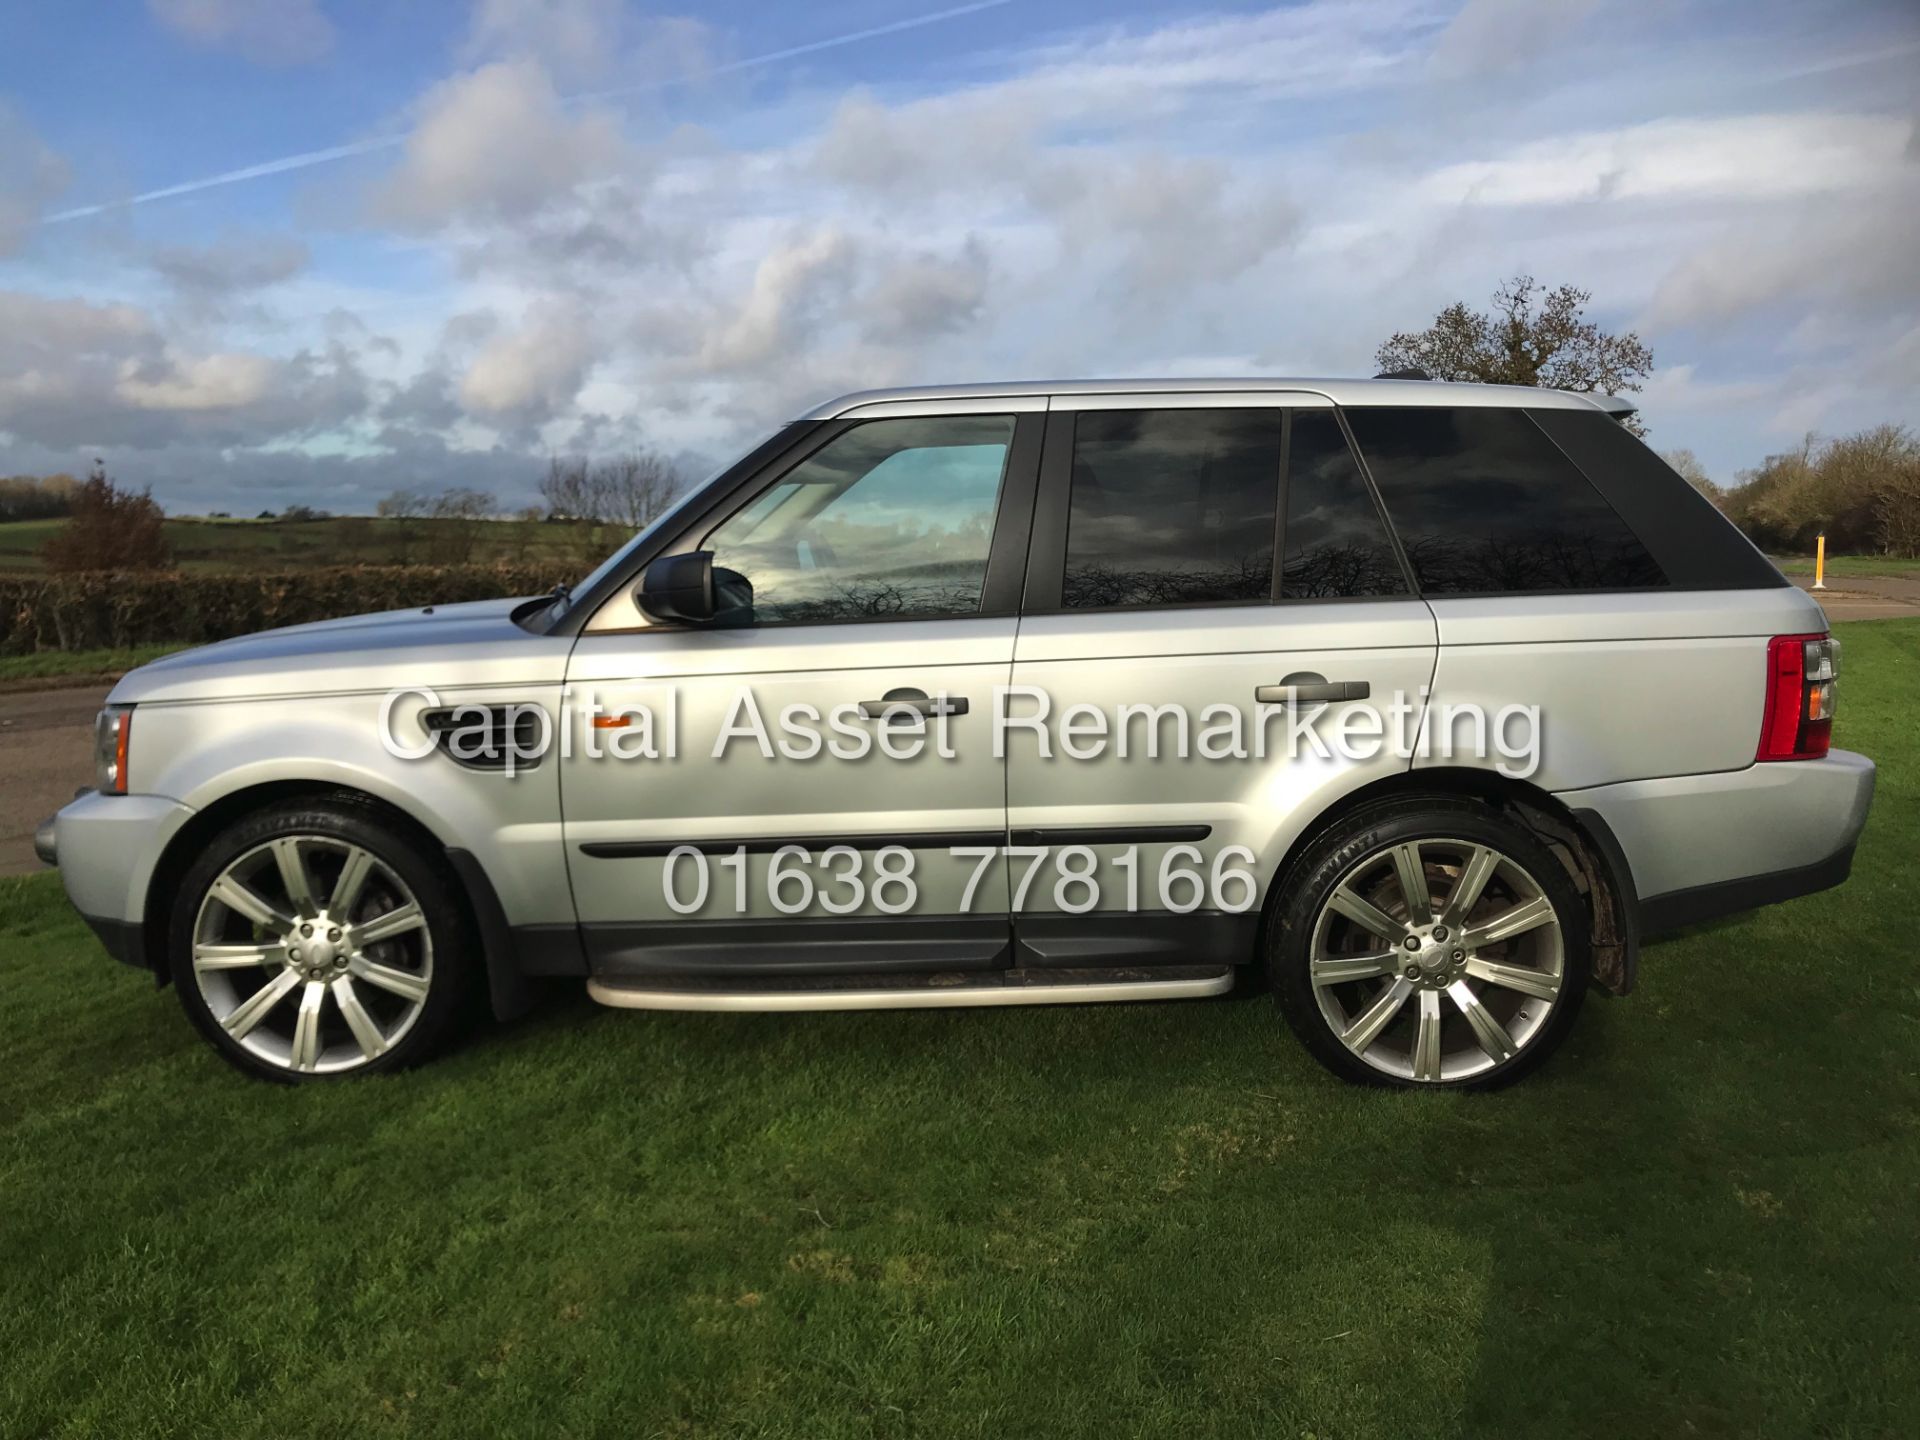 (ON SALE) RANGE ROVER SPORT 2.7TDV6 AUTO (08 REG) FULLY LOADED -SAT NAV -LEATHER-ELECTRIC EVERYTHING - Image 6 of 27